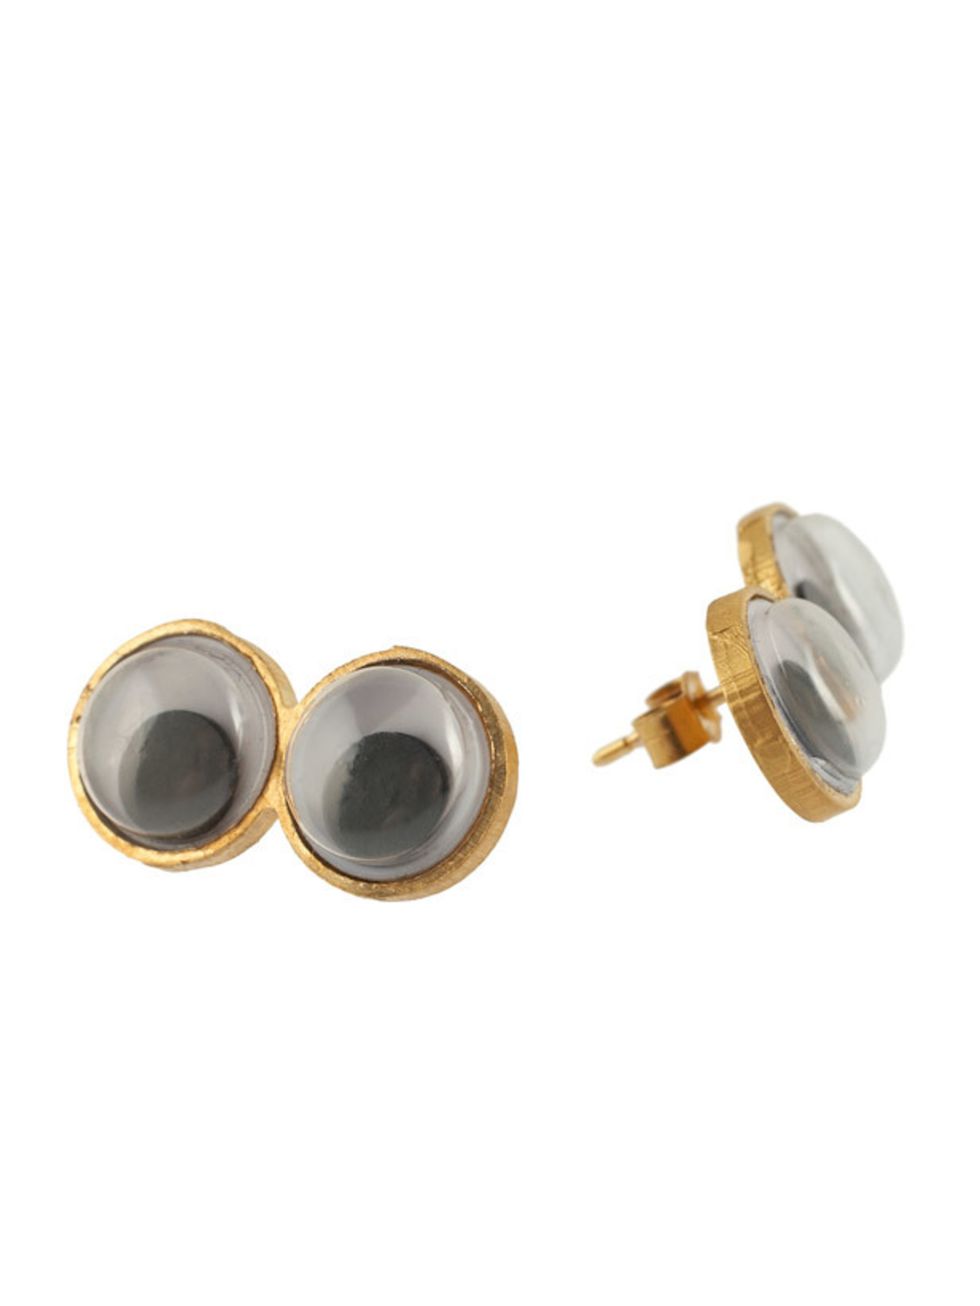 <p>Staying true to her fun, playful aesthetic, Louise Grays debut jewellery collection is completely bonkers. And we love it... Louise Gray for ASOS googly eye earrings, £45, at <a href="http://www.asos.com/Women/A-To-Z-Of-Brands/Louise-Gray/Cat/pgecateg